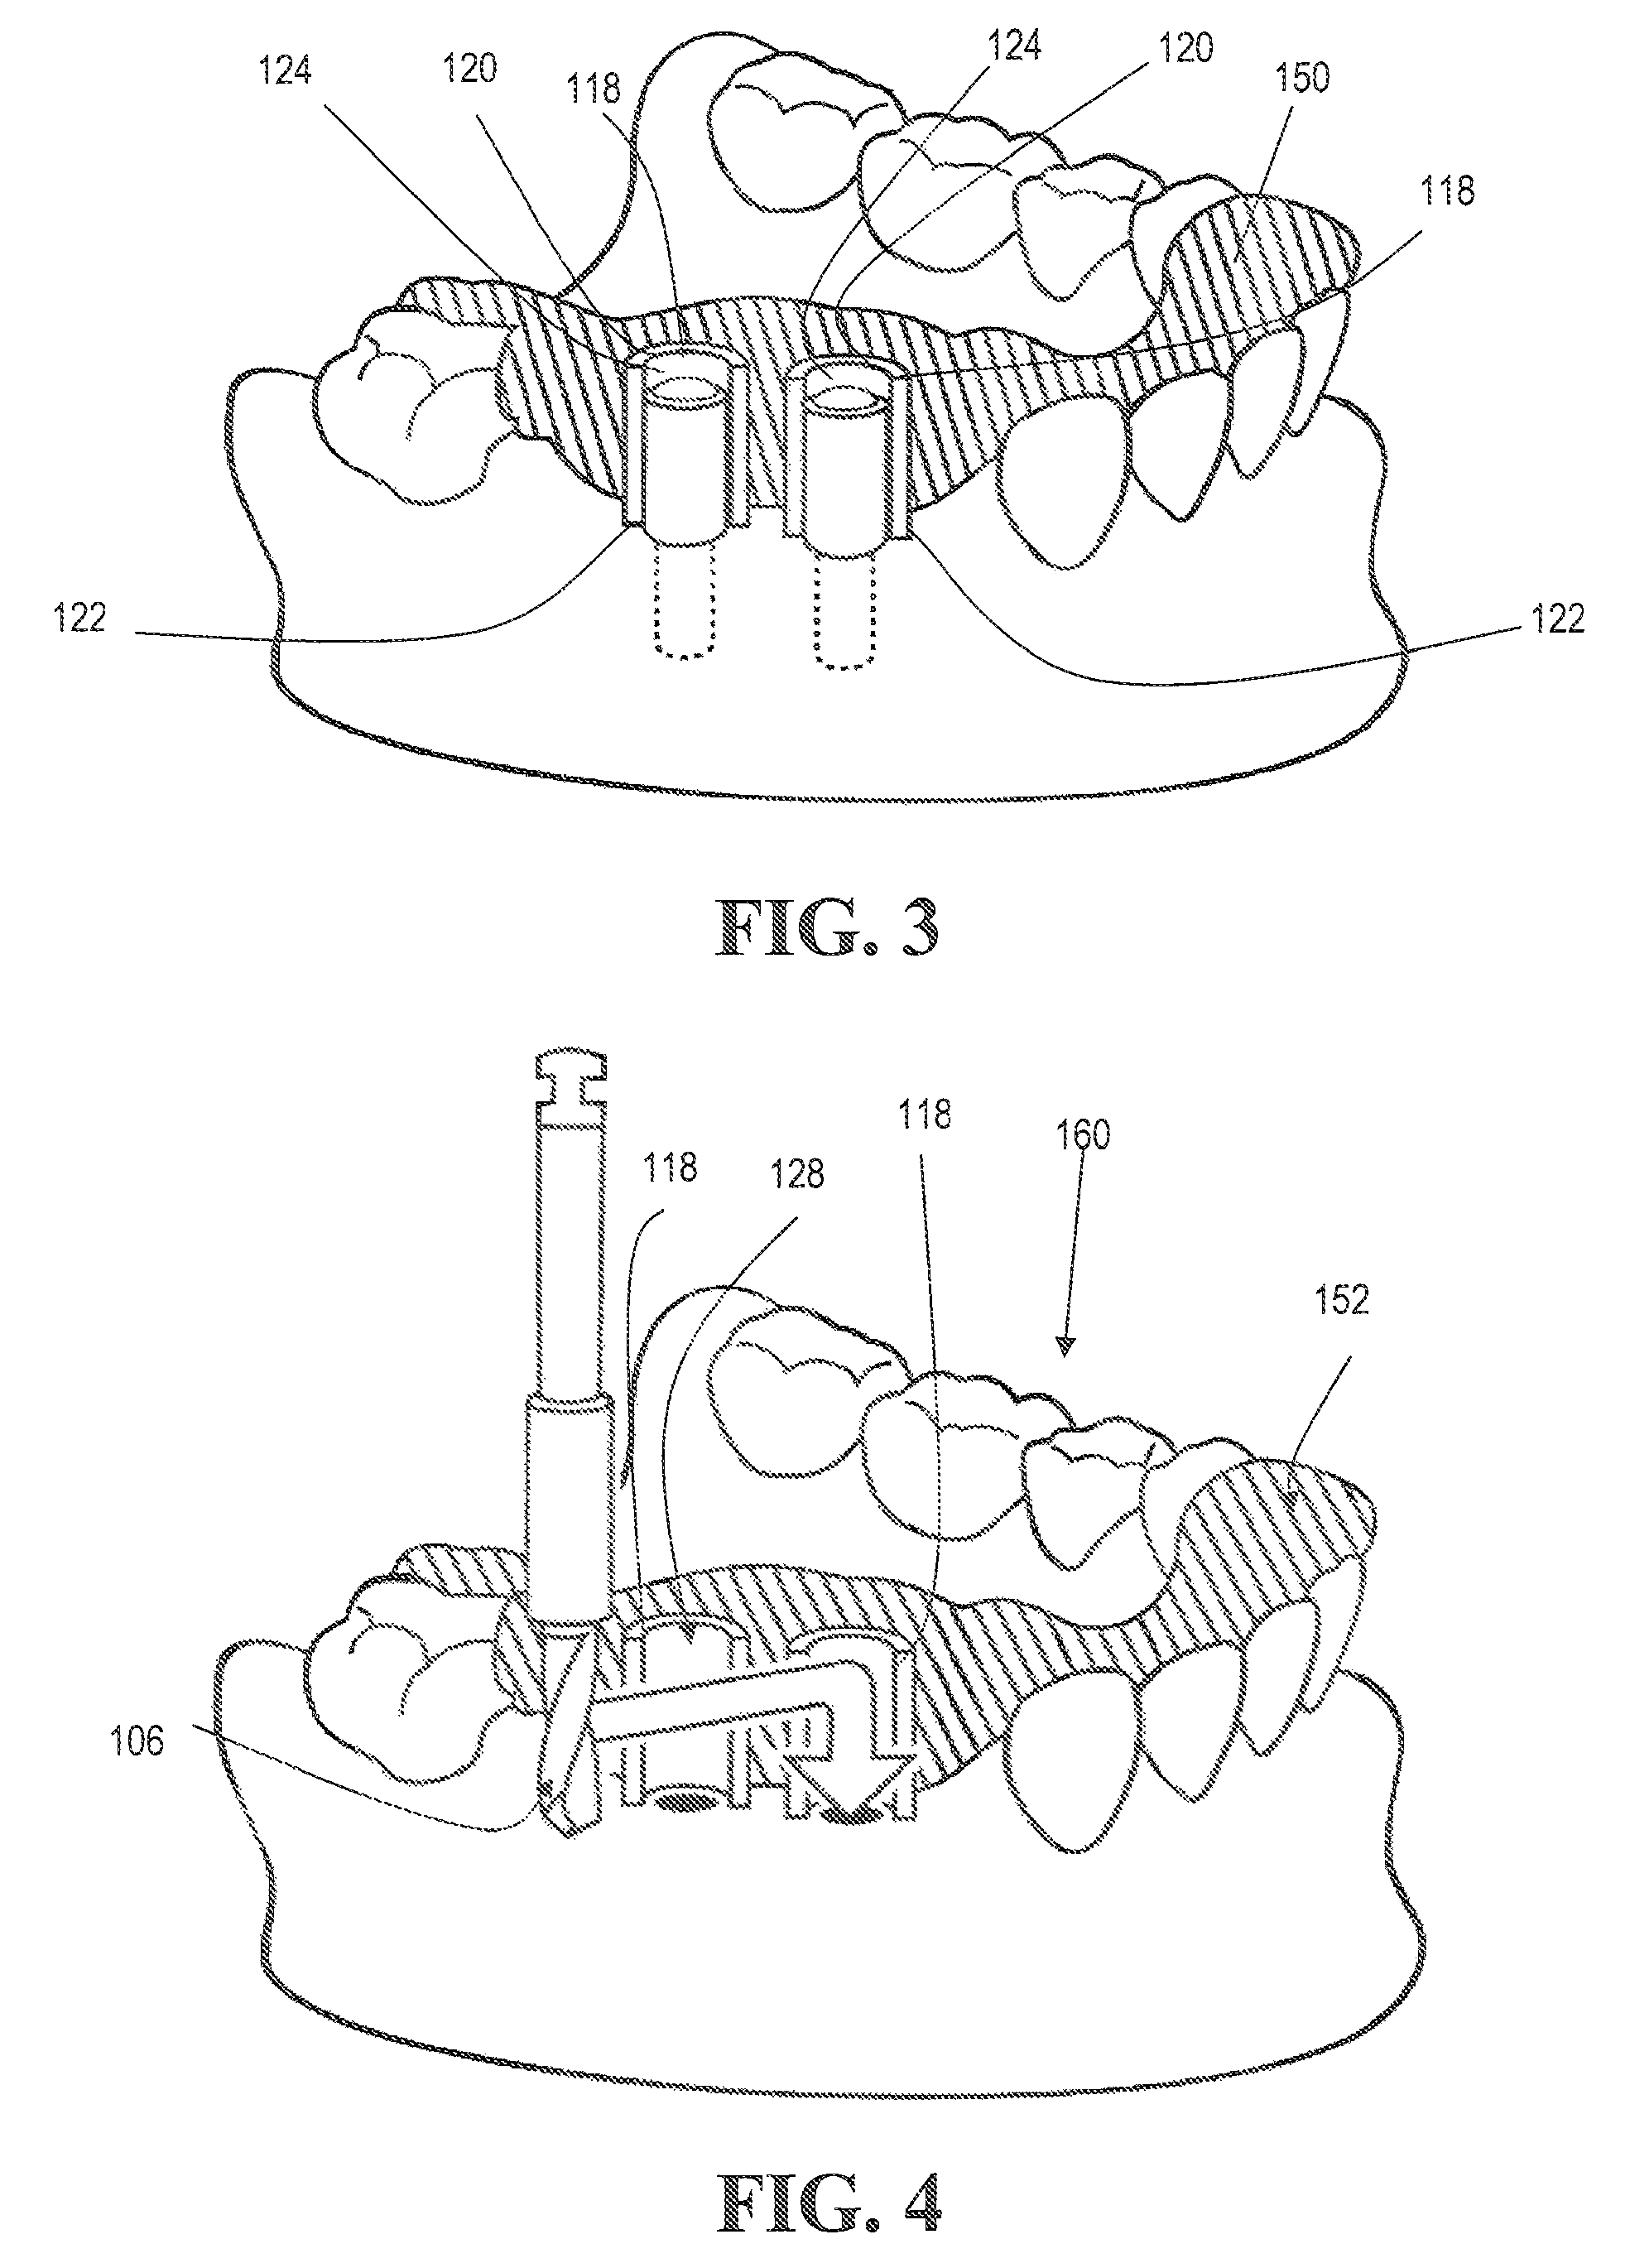 Method for making and using a template for locating a dental implant and components relating thereto